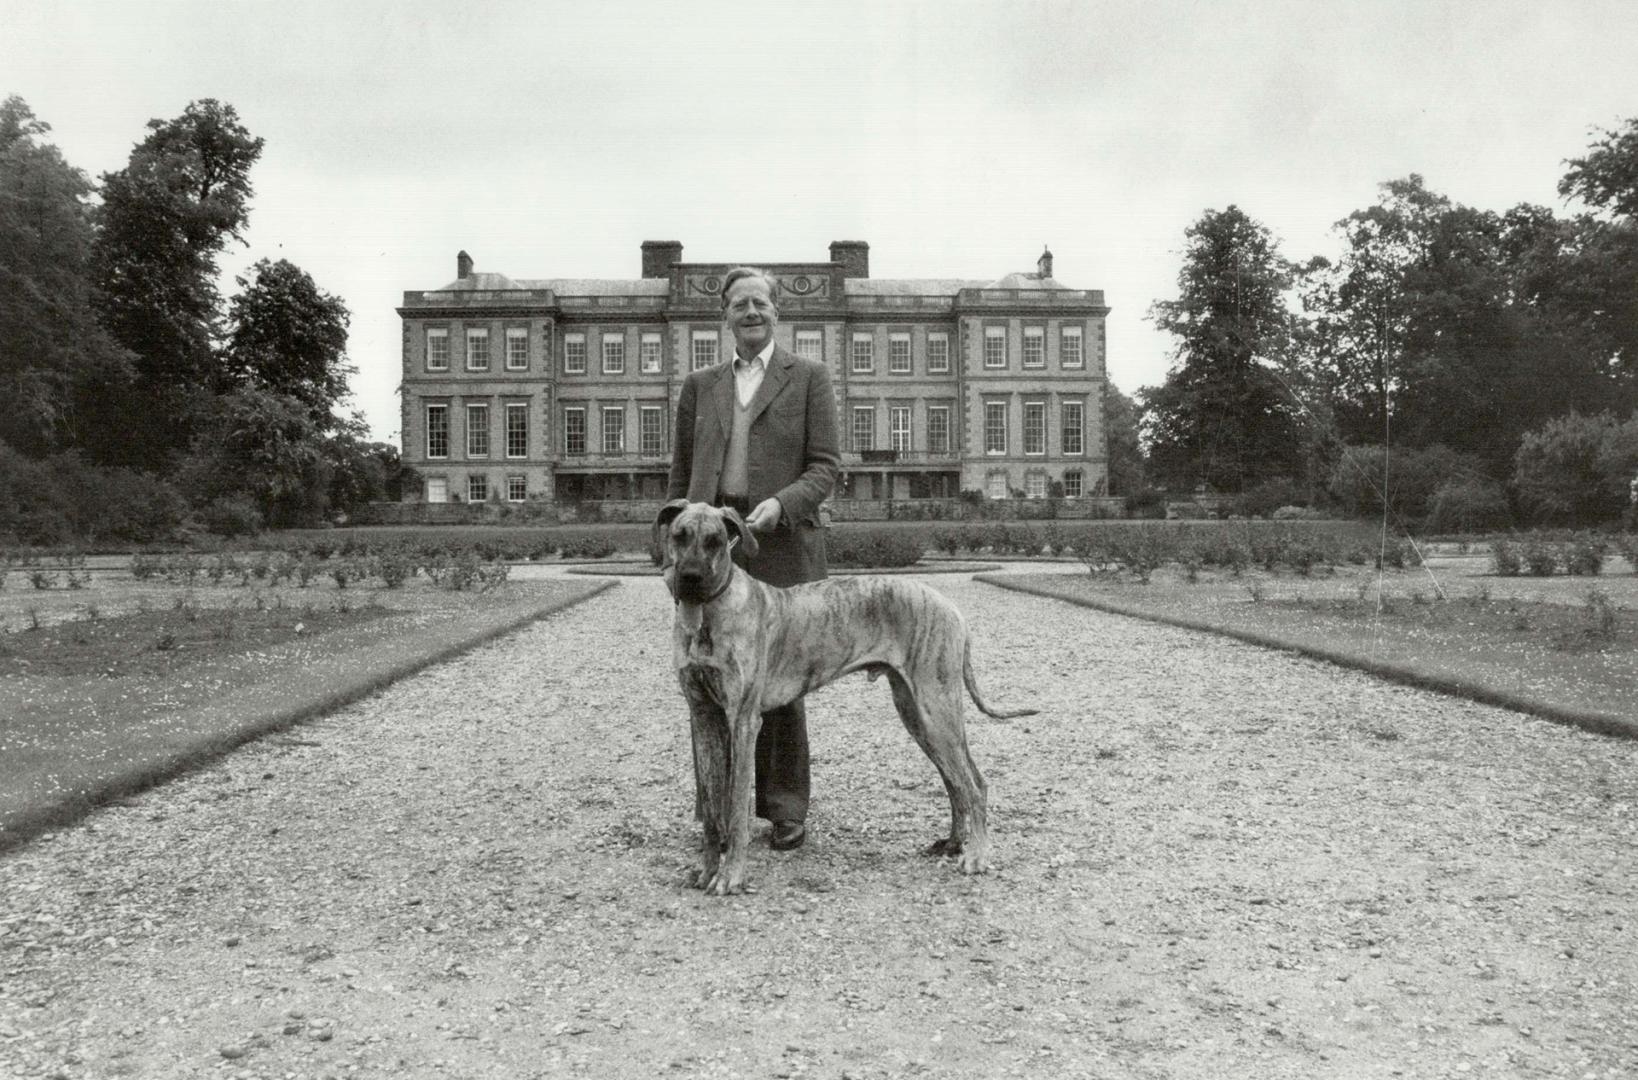 Join Lord Hertford and Homer for a night at Ragley Hall